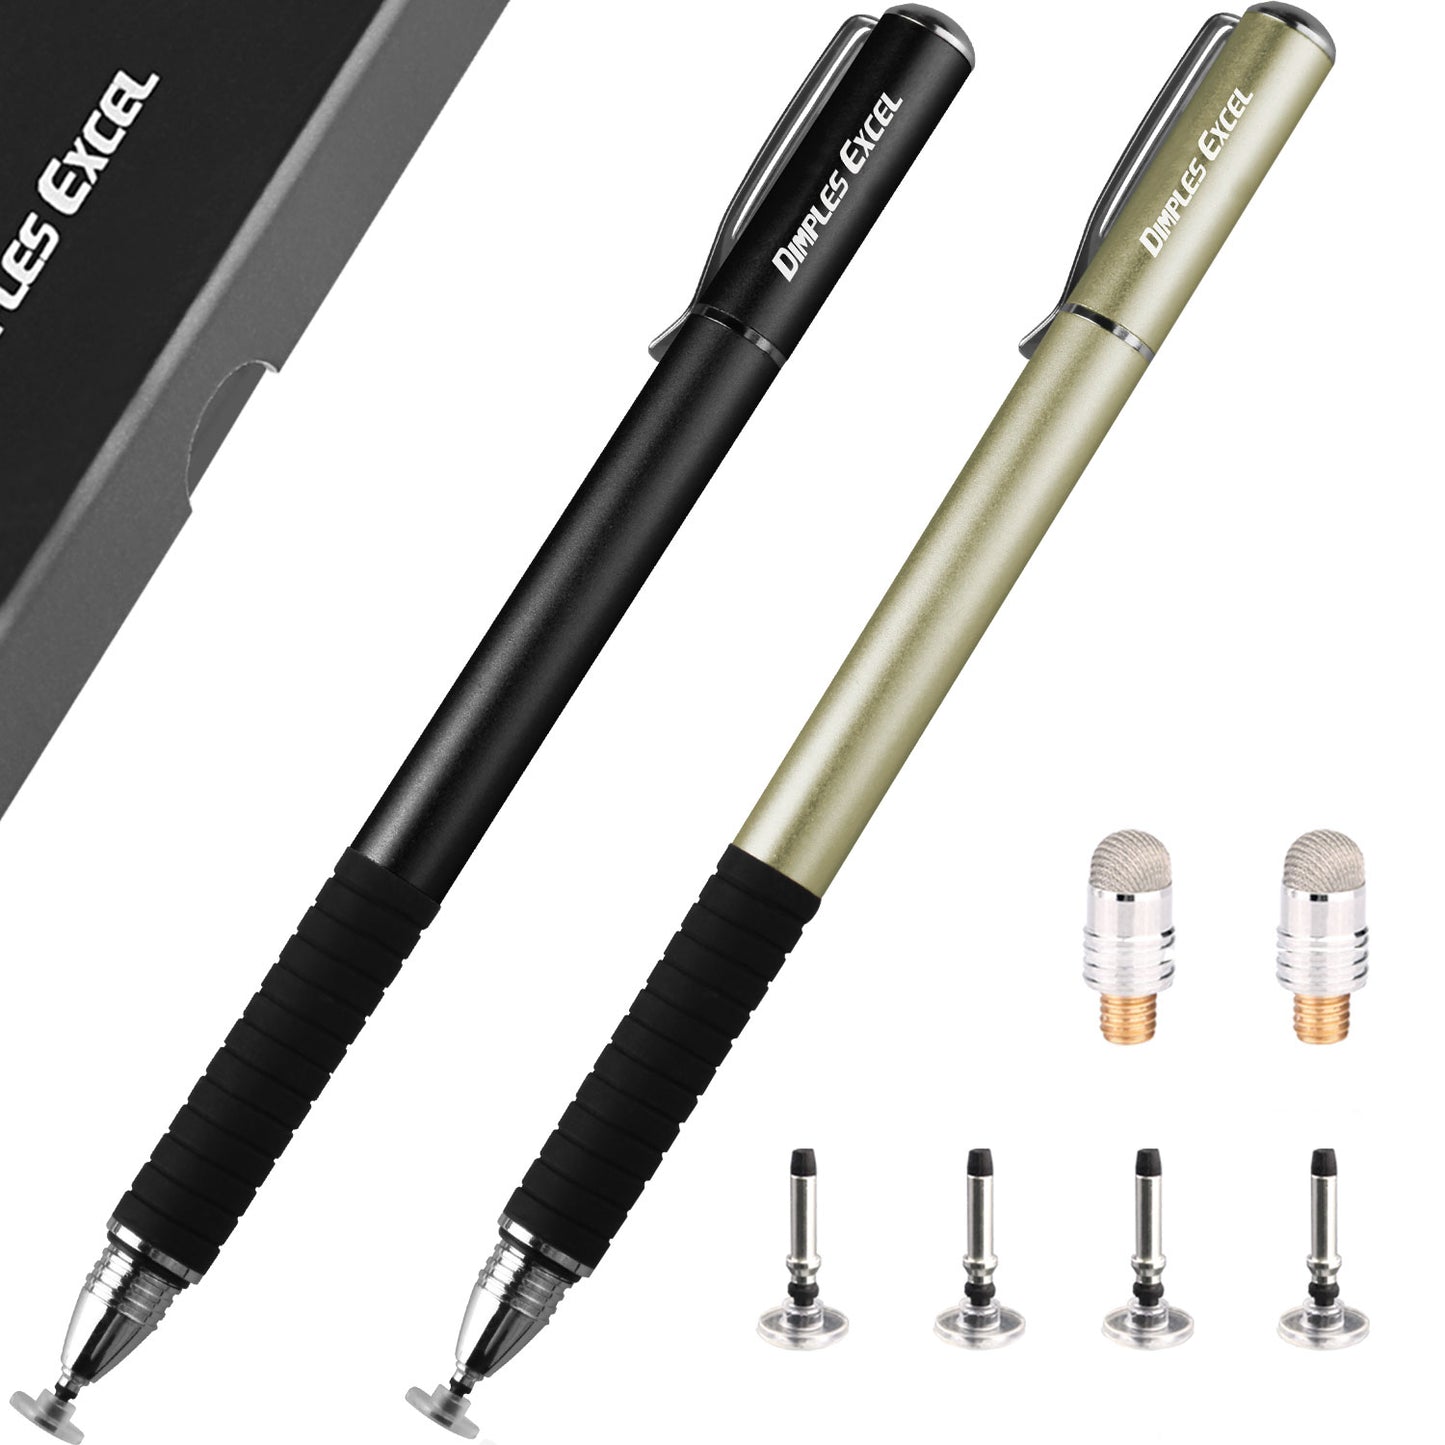 2 in 1 Silicone Disc and Fiber Tip Stylus Pens for Iphone and Ipad Tablet Touch Screens